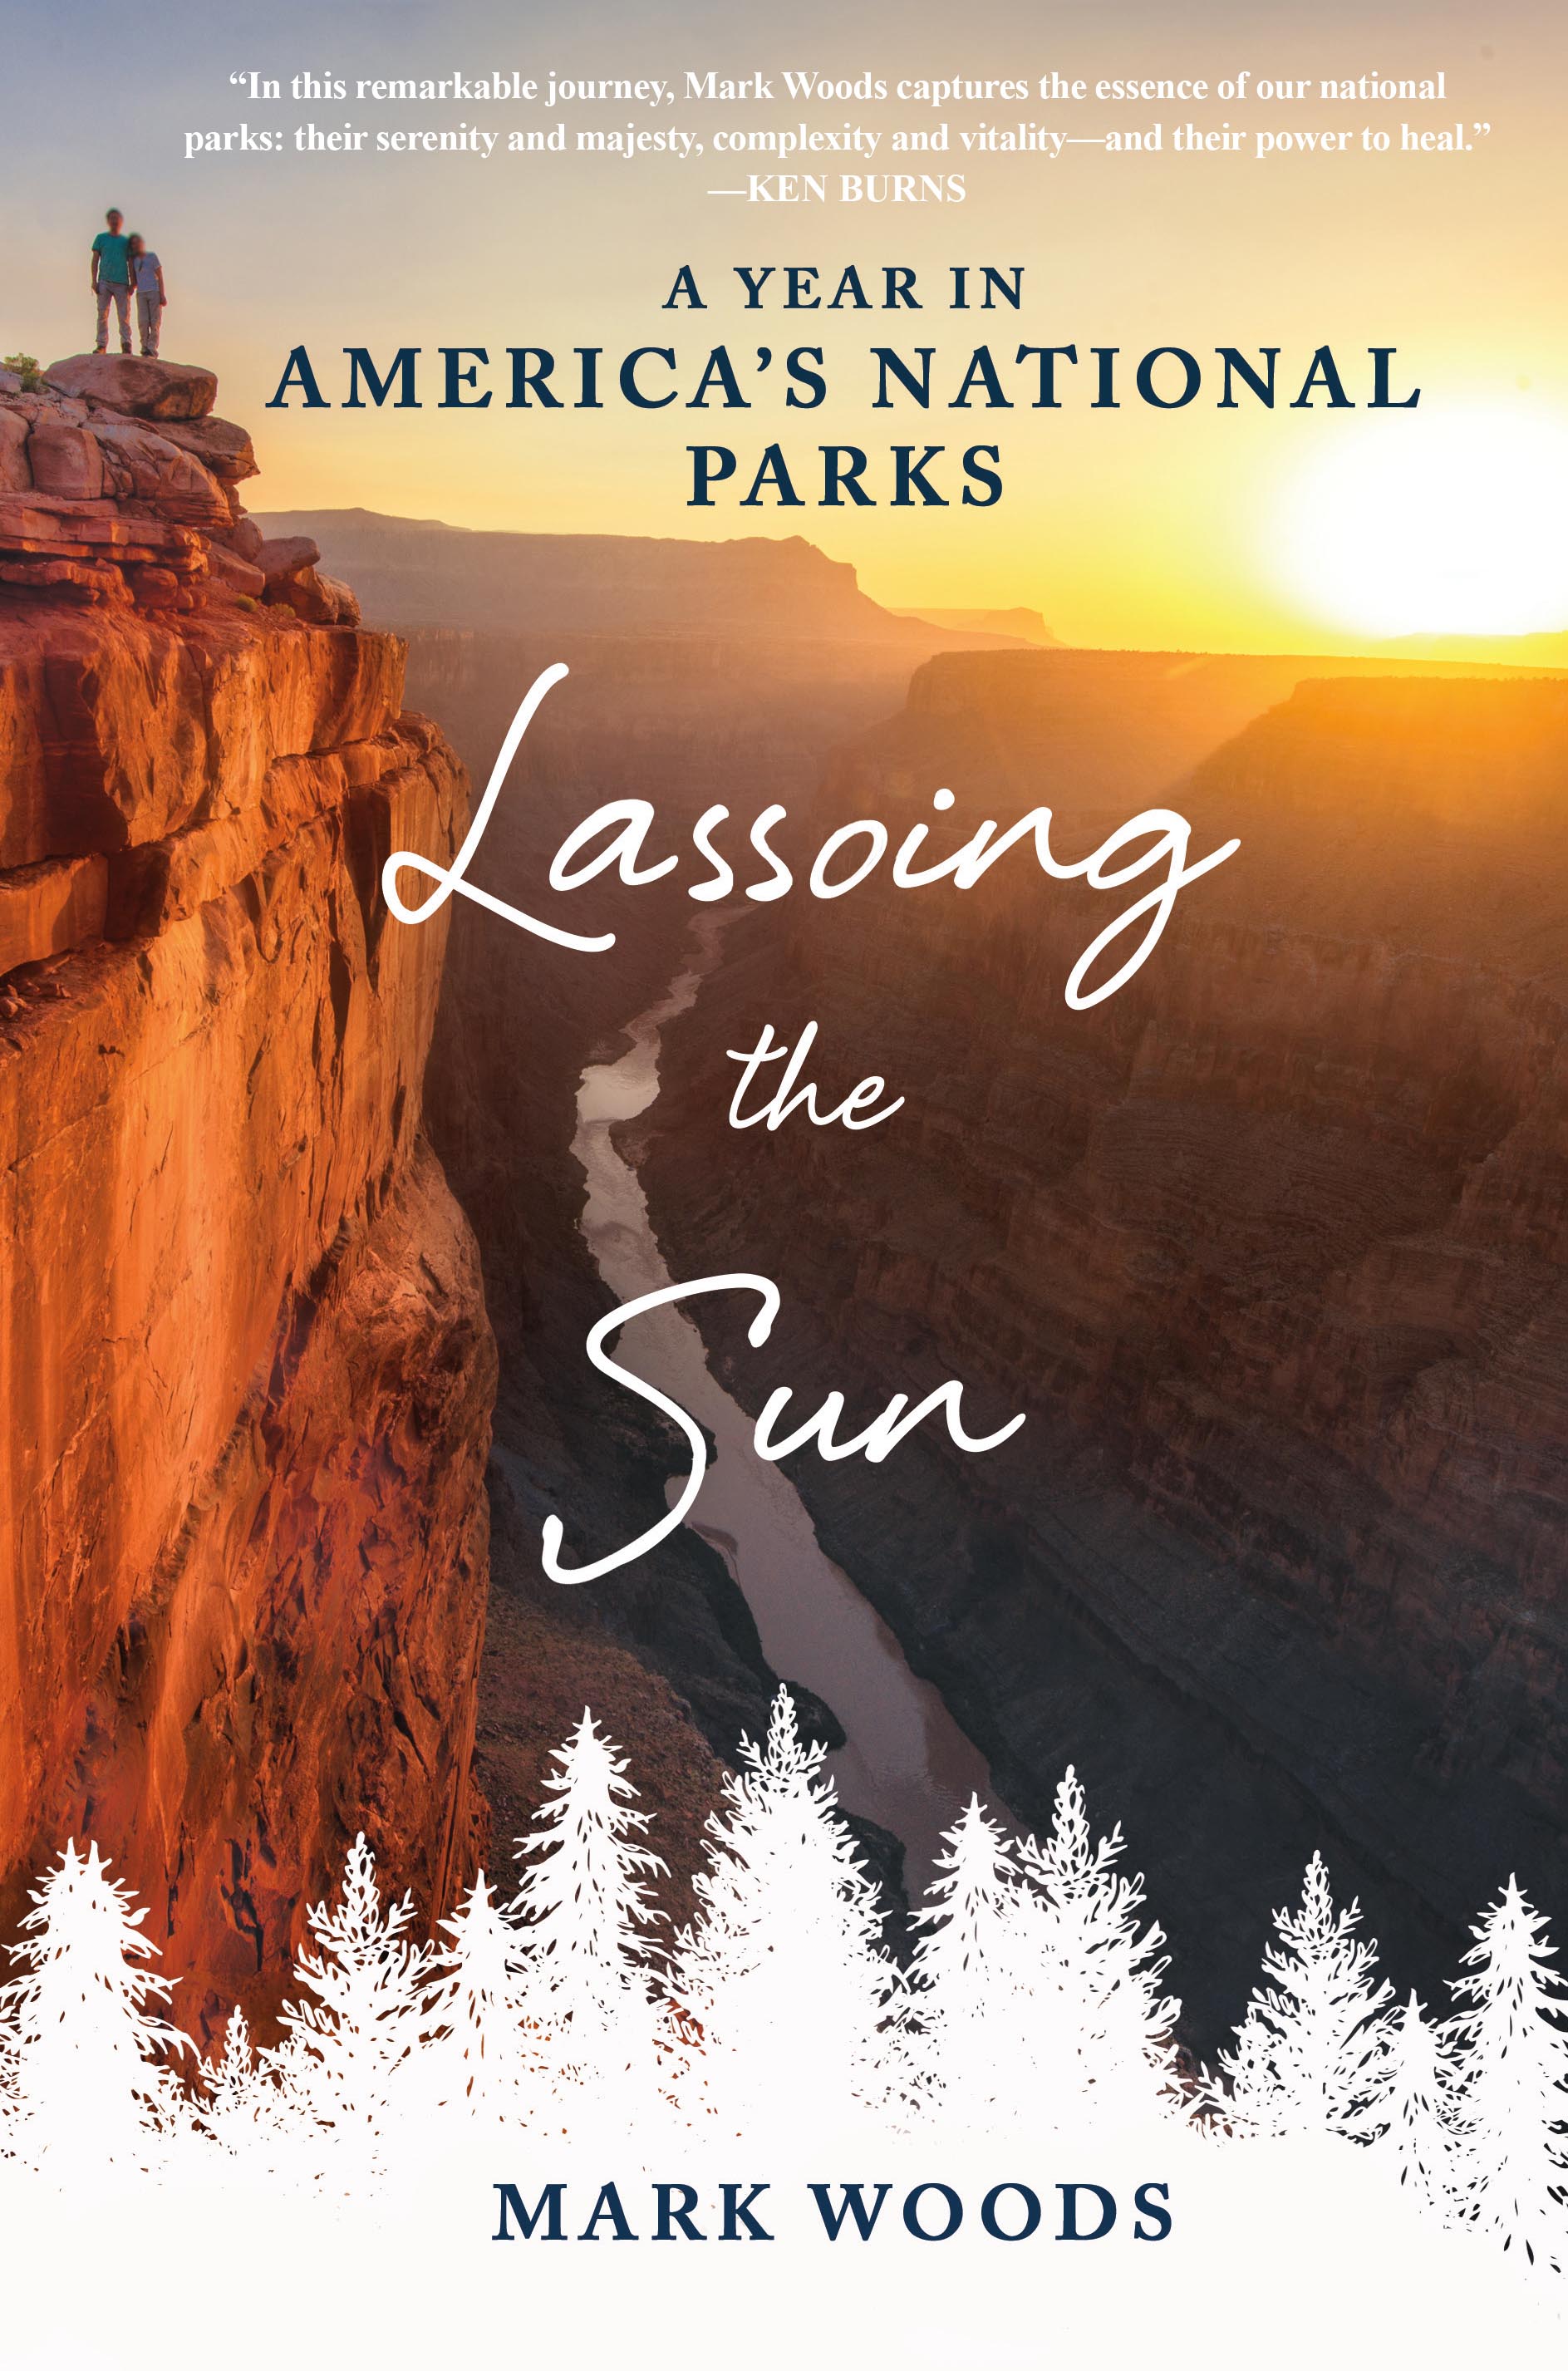 Book Review: Lassoing the Sun by Mark Woods